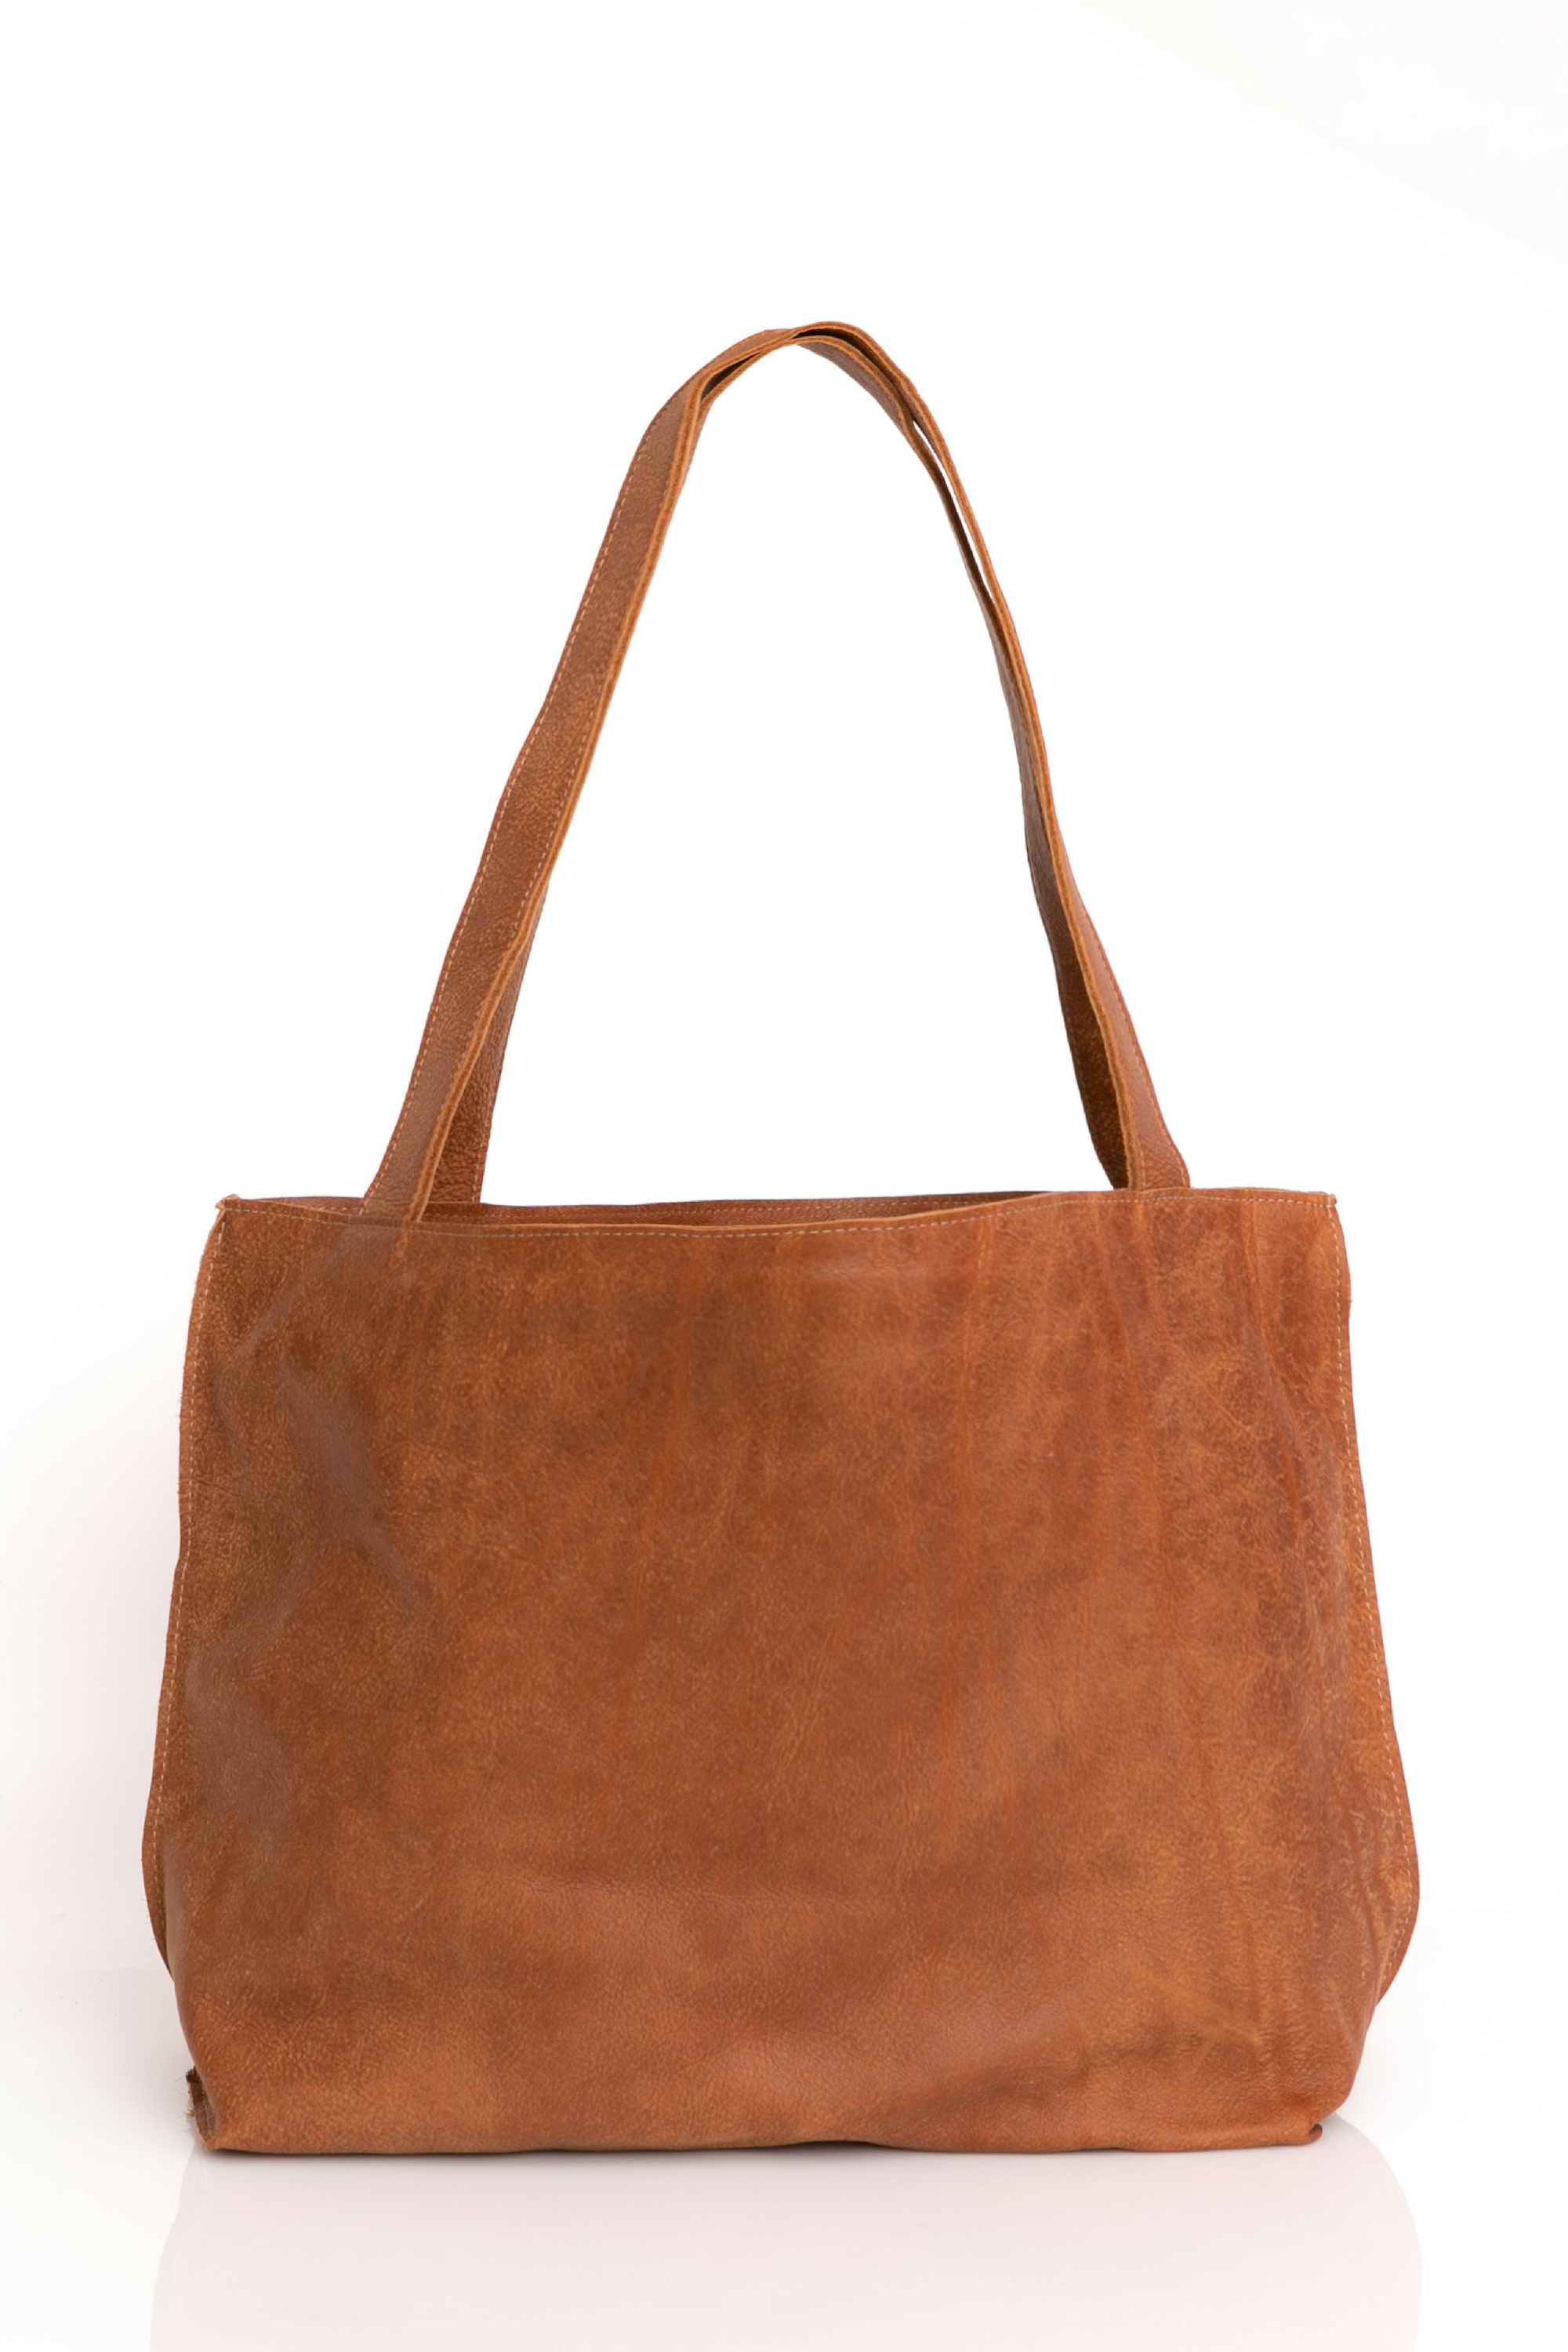 Minimalist Tote Bag With Inner Pouch | Minimalist tote bag, Bags,  Minimalist tote